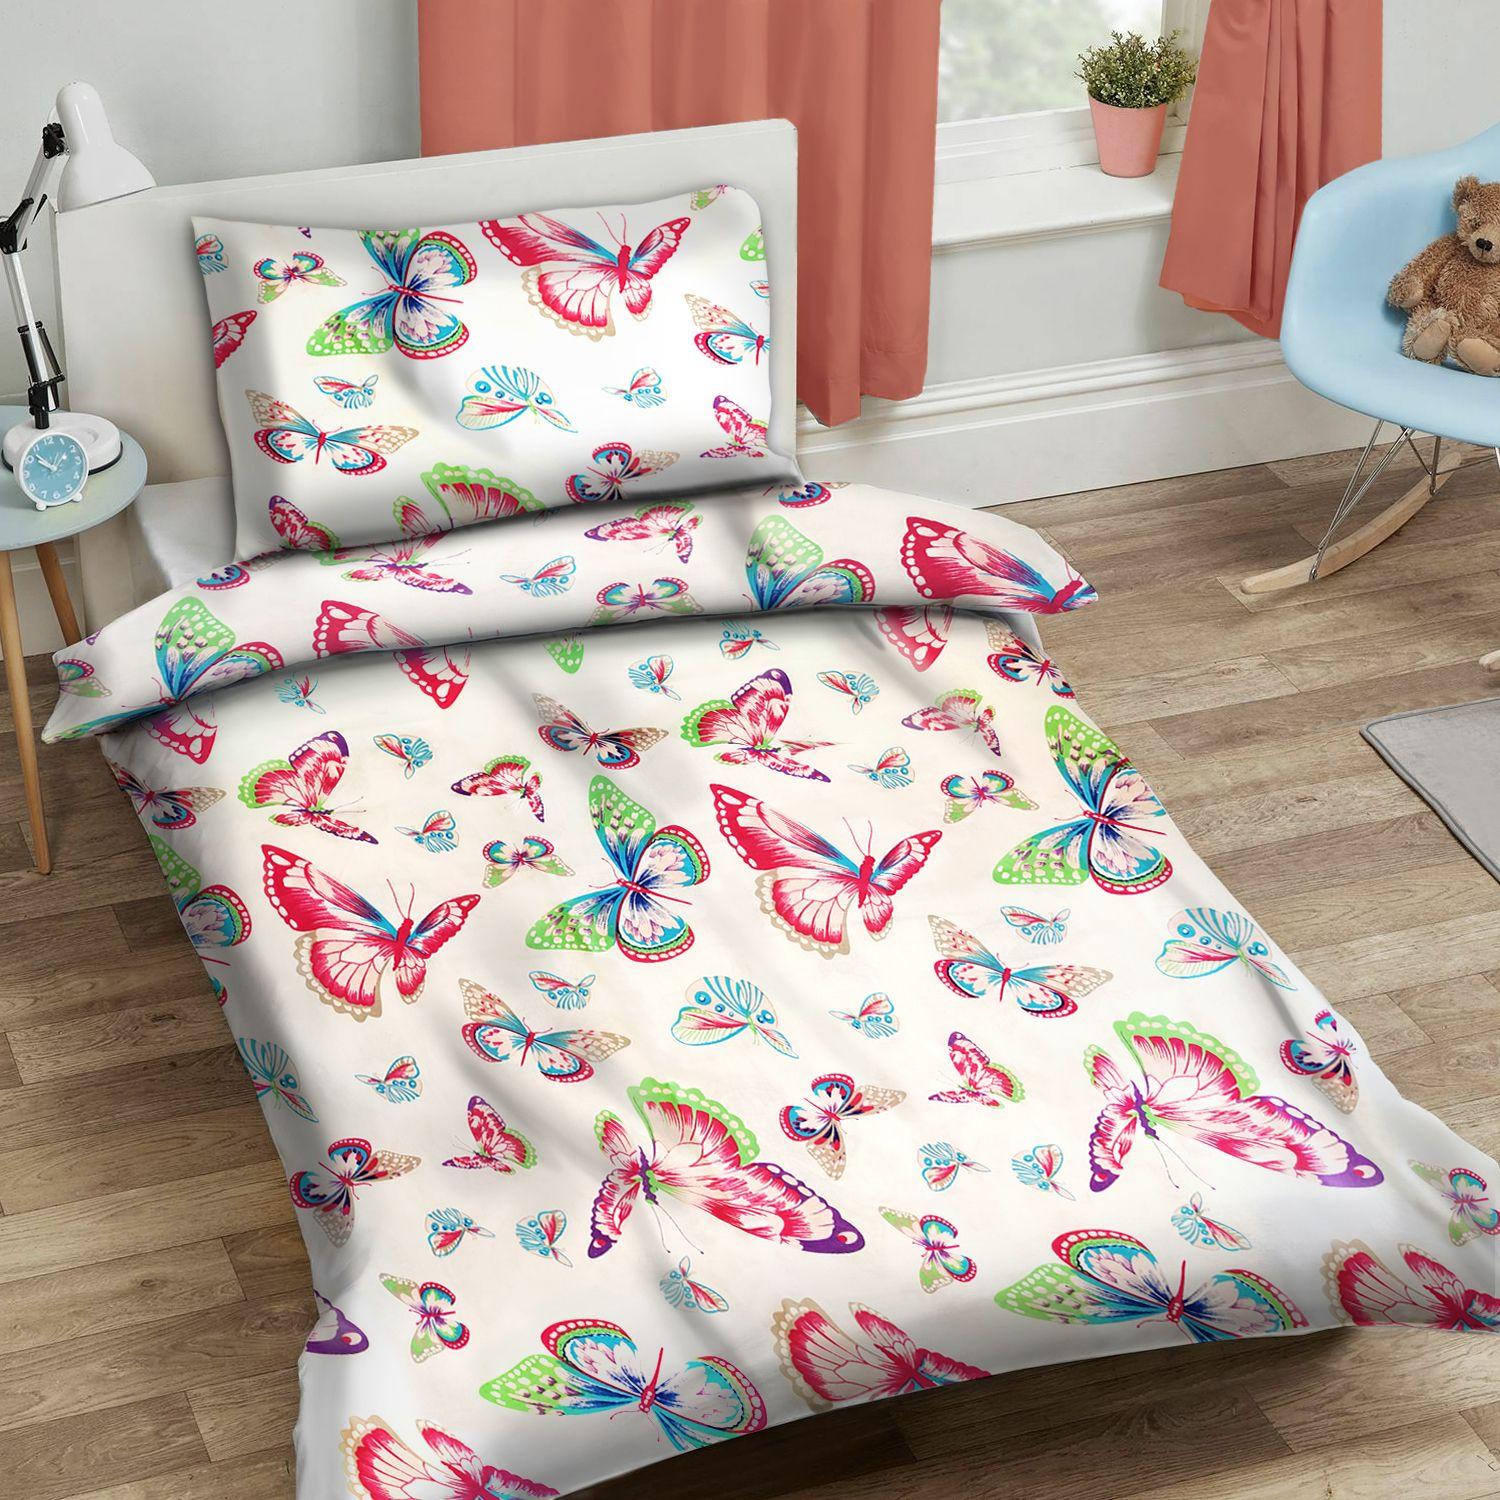 Set of children's bedding 90x120cm - color butterfly